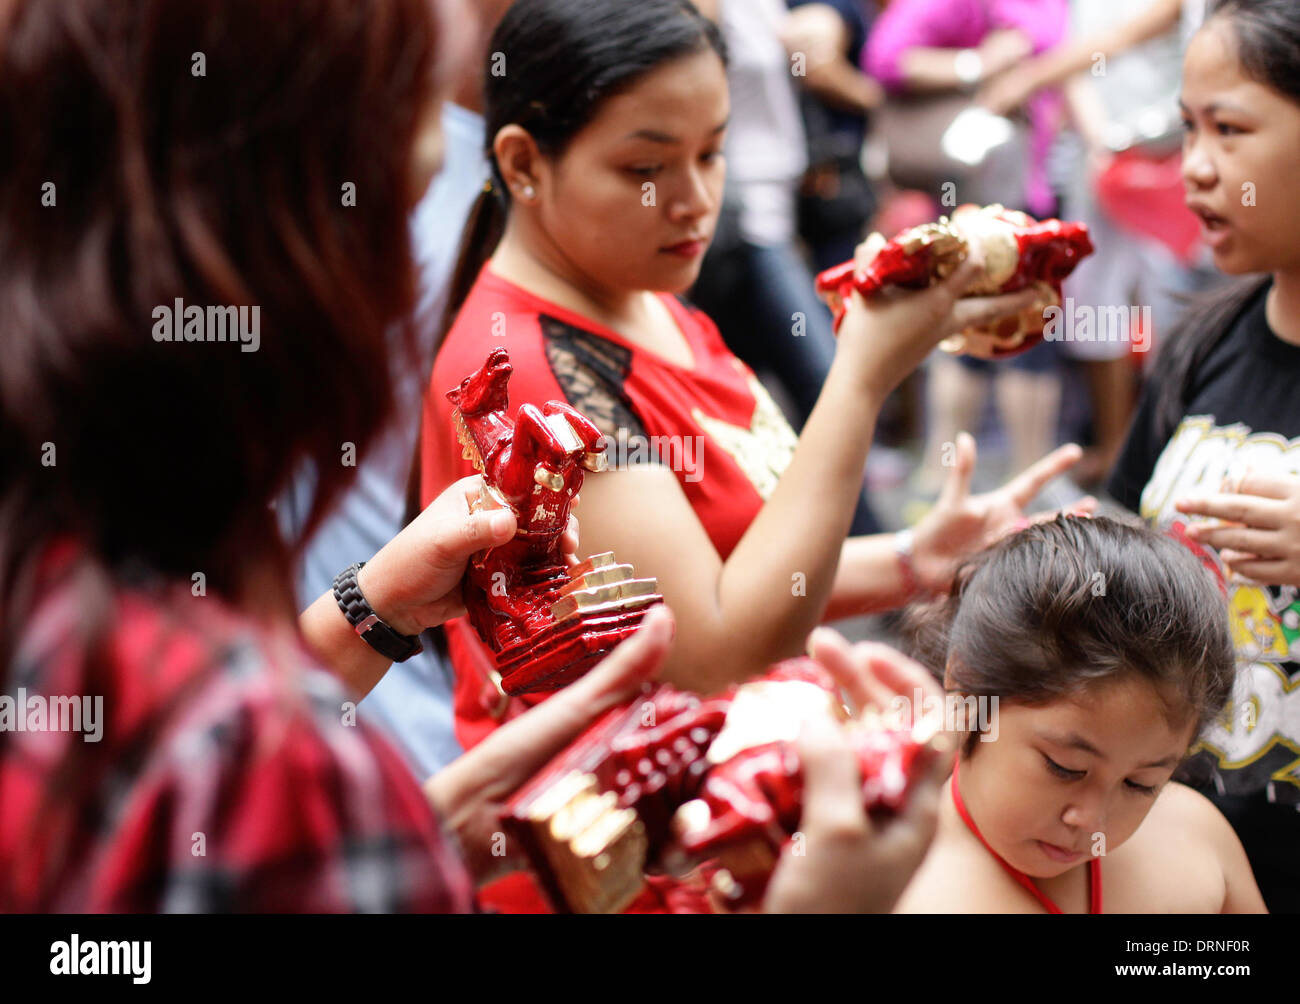 Manila, Phillipines. 30th January 2014. Shoppers look at lucky charms in the form of horses in Chinatown Manila on January 30, 2014 a day before Chinese New Year, the Year of the Horse. Photo by Mark Cristino/Alamy Live News Stock Photo